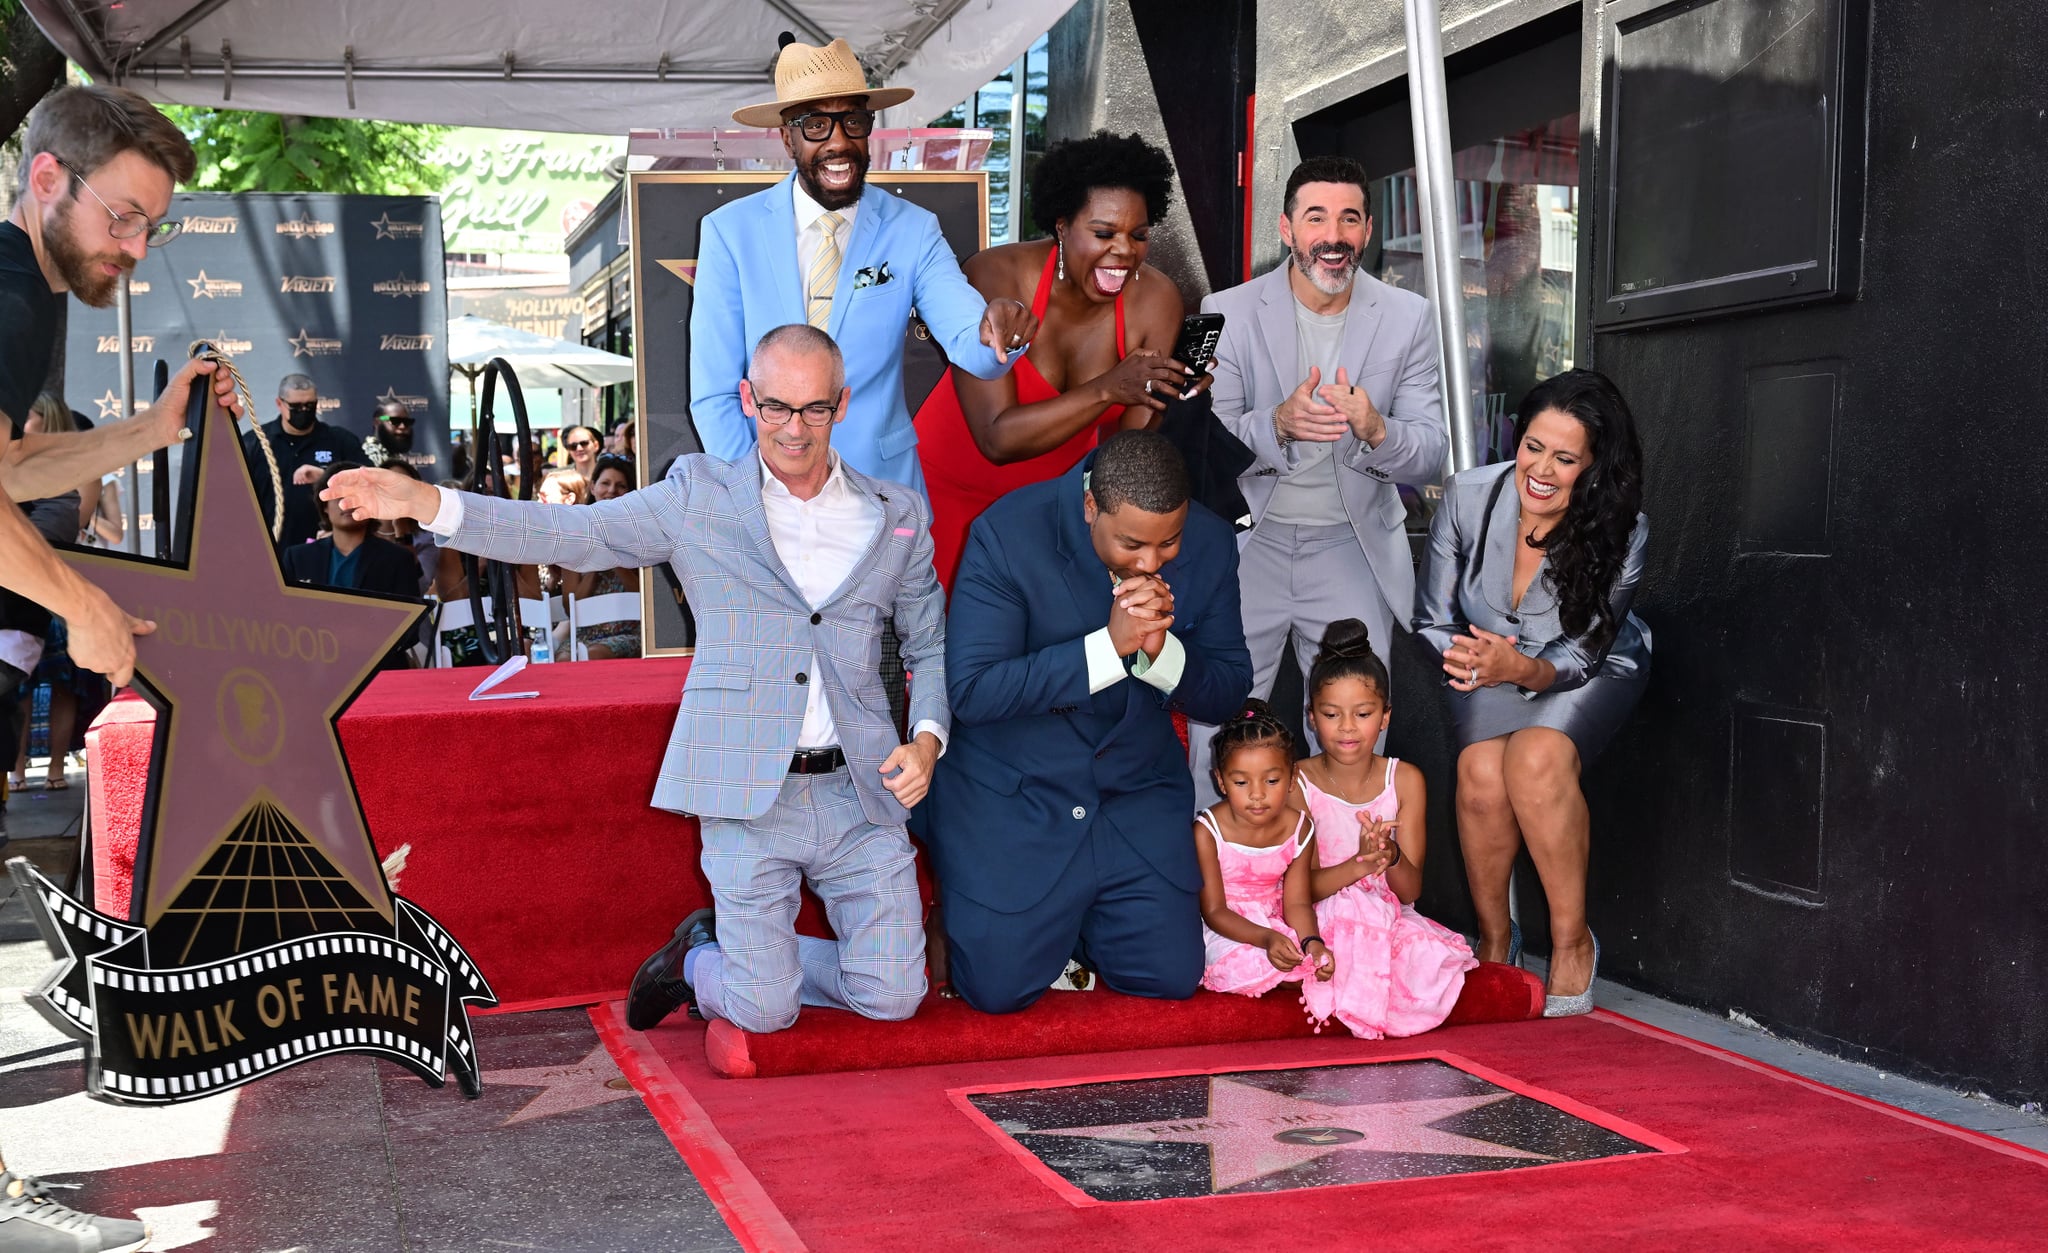 Comedian and actor Kenan Thompson reacts beside his two daughters as his Hollywood Walk of Fame Star is unveiled on August 11, 2022 in Hollywood.Attending the ceremony behind Thompson are (L to R) JB Smoove, Josh Server, and Leslie Jones. - Thompson's distinction will make him the 2,728th star in the Hollywood Walk of Fames television category. (Photo by Frederic J. BROWN / AFP) (Photo by FREDERIC J. BROWN/AFP via Getty Images)